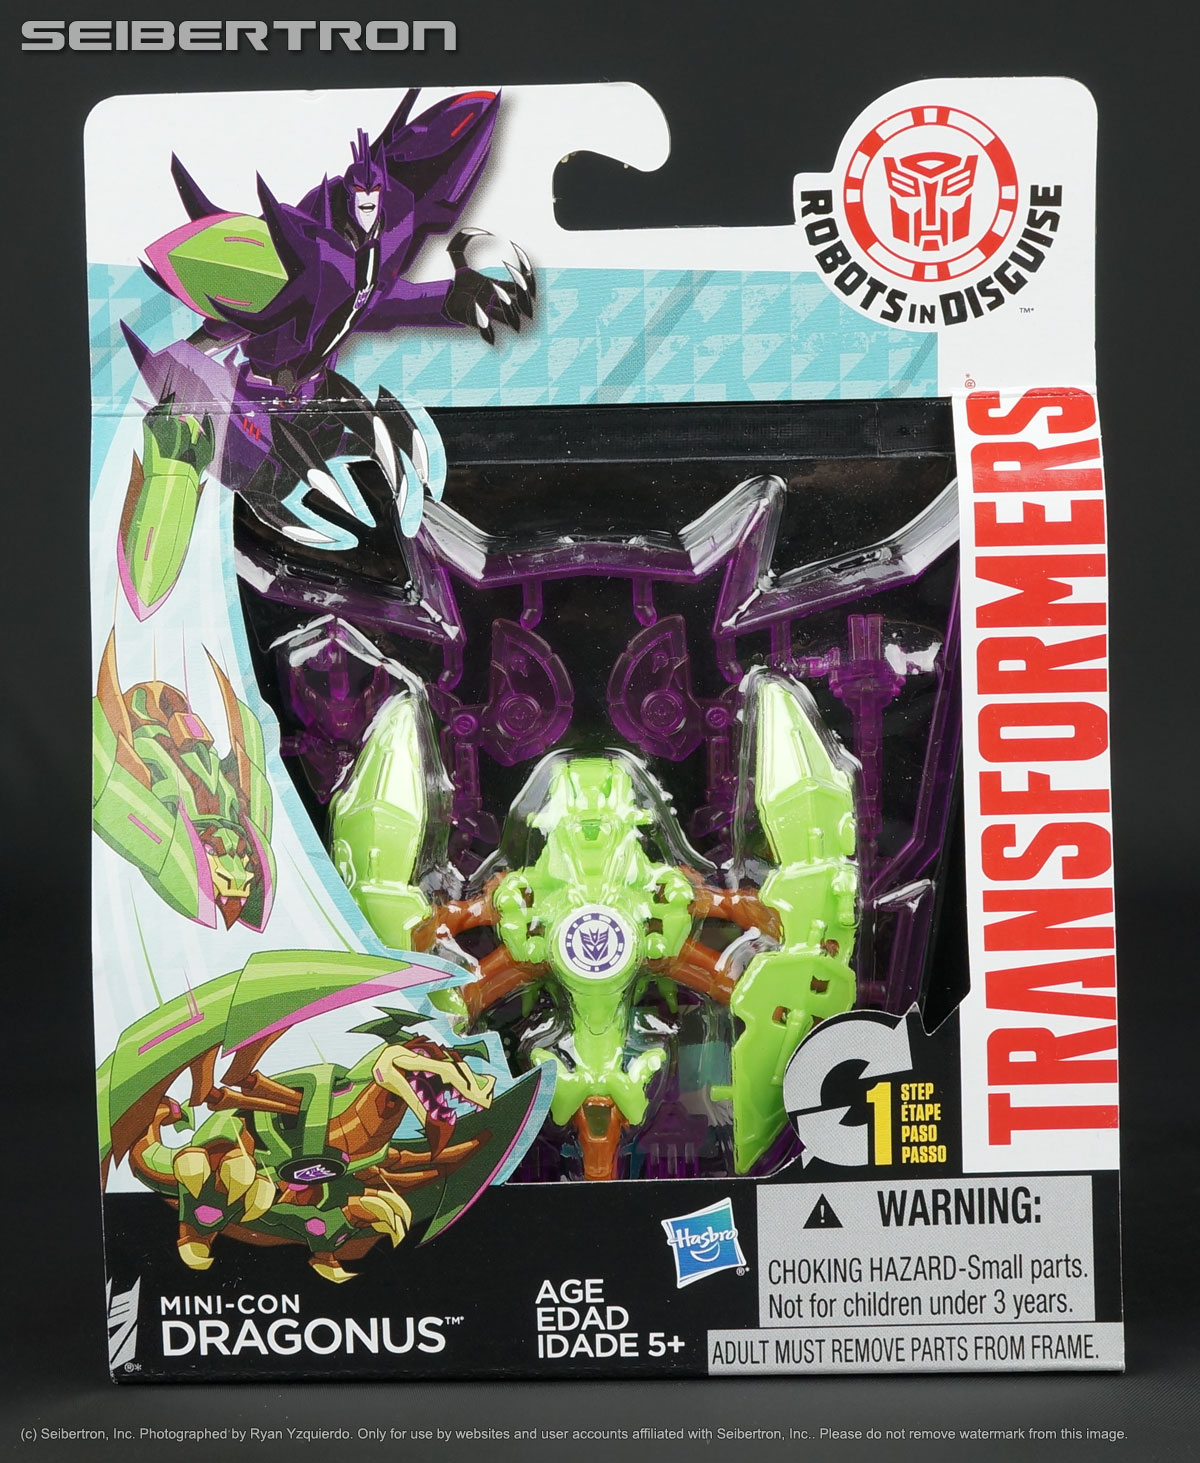 Transformers, Shopkins, Masters of the Universe, Teenage Mutant Ninja Turtles, Comic Books, and other listings from Seibertron.com: Mini-Con DRAGONUS Transformers Robots In Disguise RID Decepticon Hasbro 2015 New